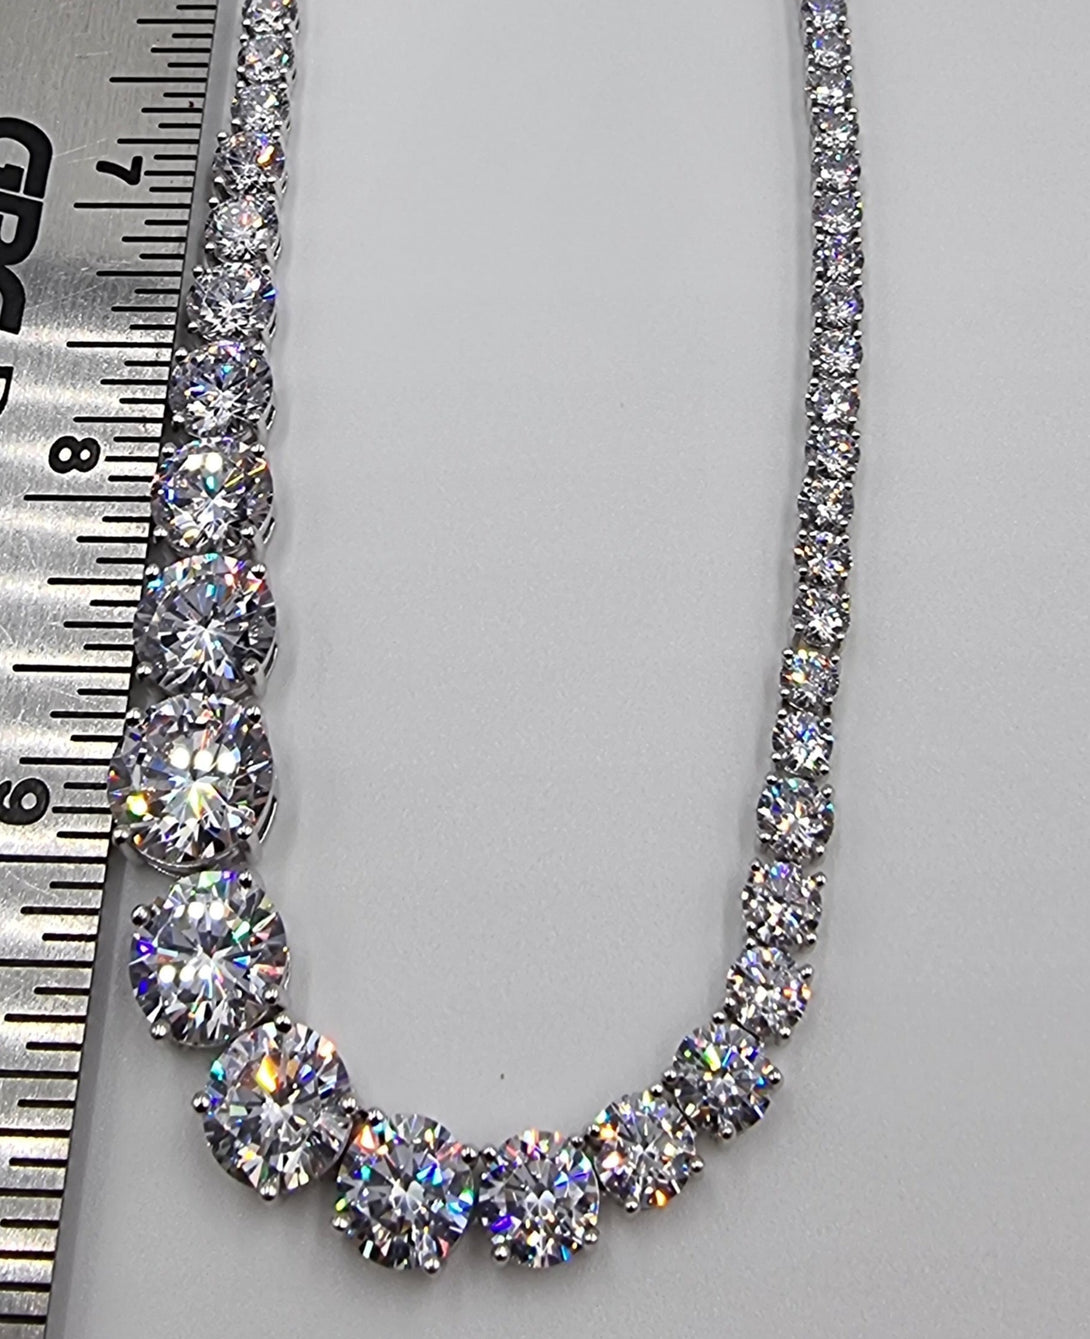 Stunning Moissanite Single Row Tennis Necklace in Silver - Boutique - Bit of Swank